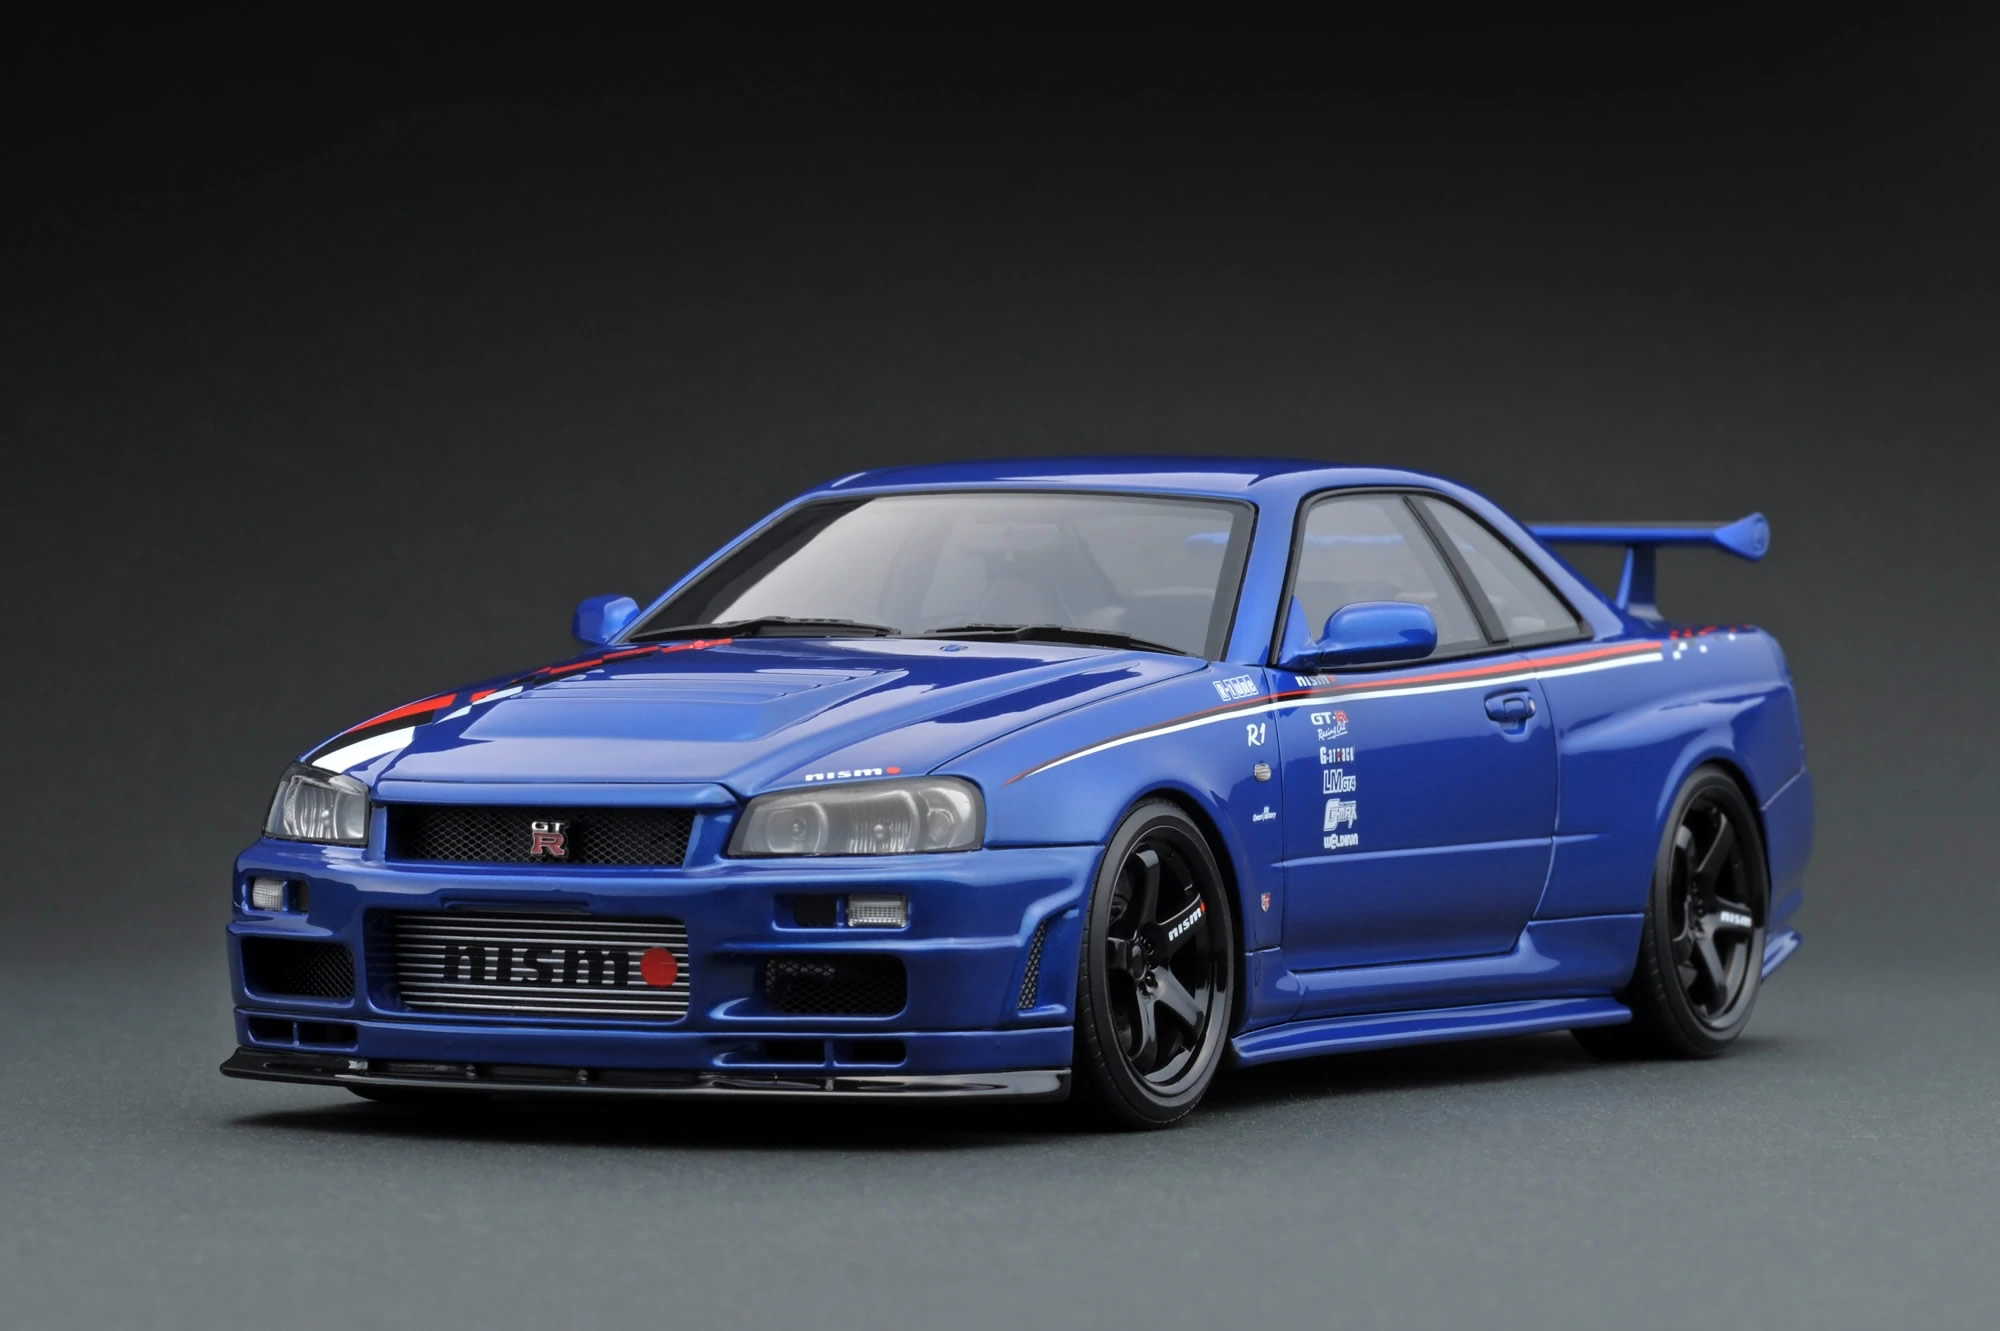 IG1827 <font color=red>1/18</font>  Nismo R34 GT-R R-tuneBayside Blue Nismo GT-R(R34) R-tune customised version ɫ Nismo LMGT4  18 Ӣ糵֣ɫ͡ԭװղɢھܡNismo ͰΣN